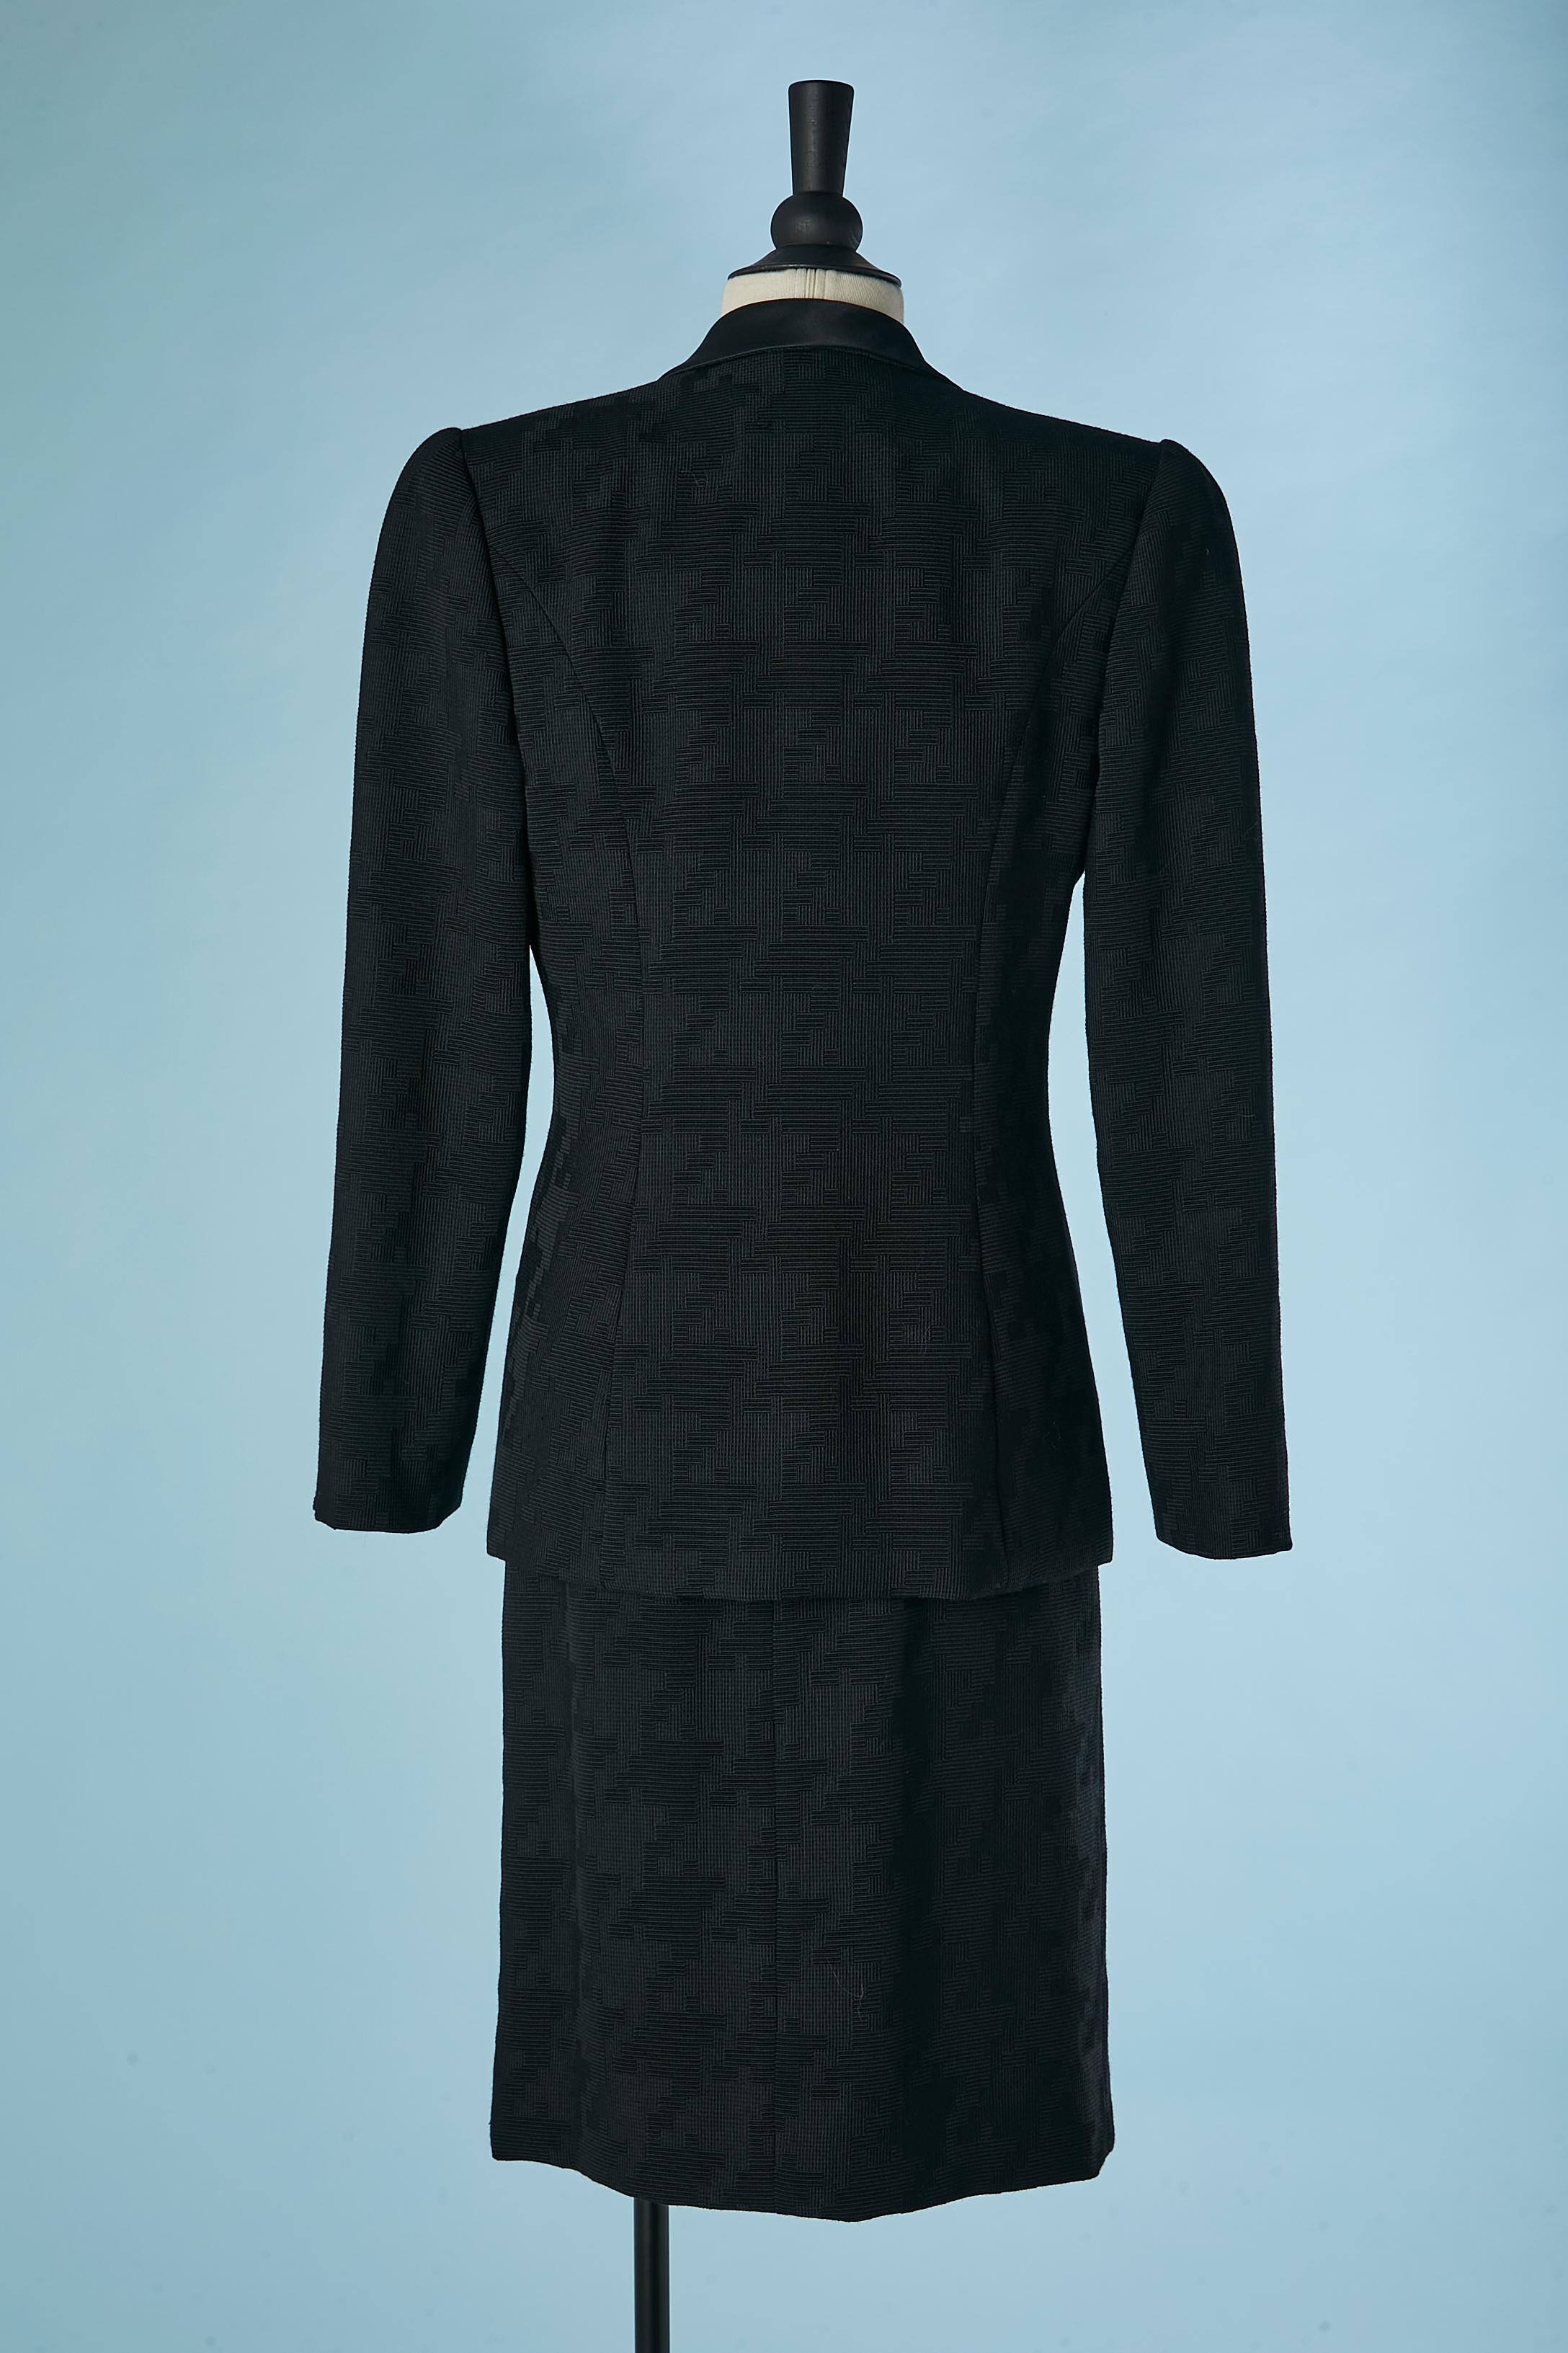 Black skirt-suit with graphic pattern Galanos  For Sale 1